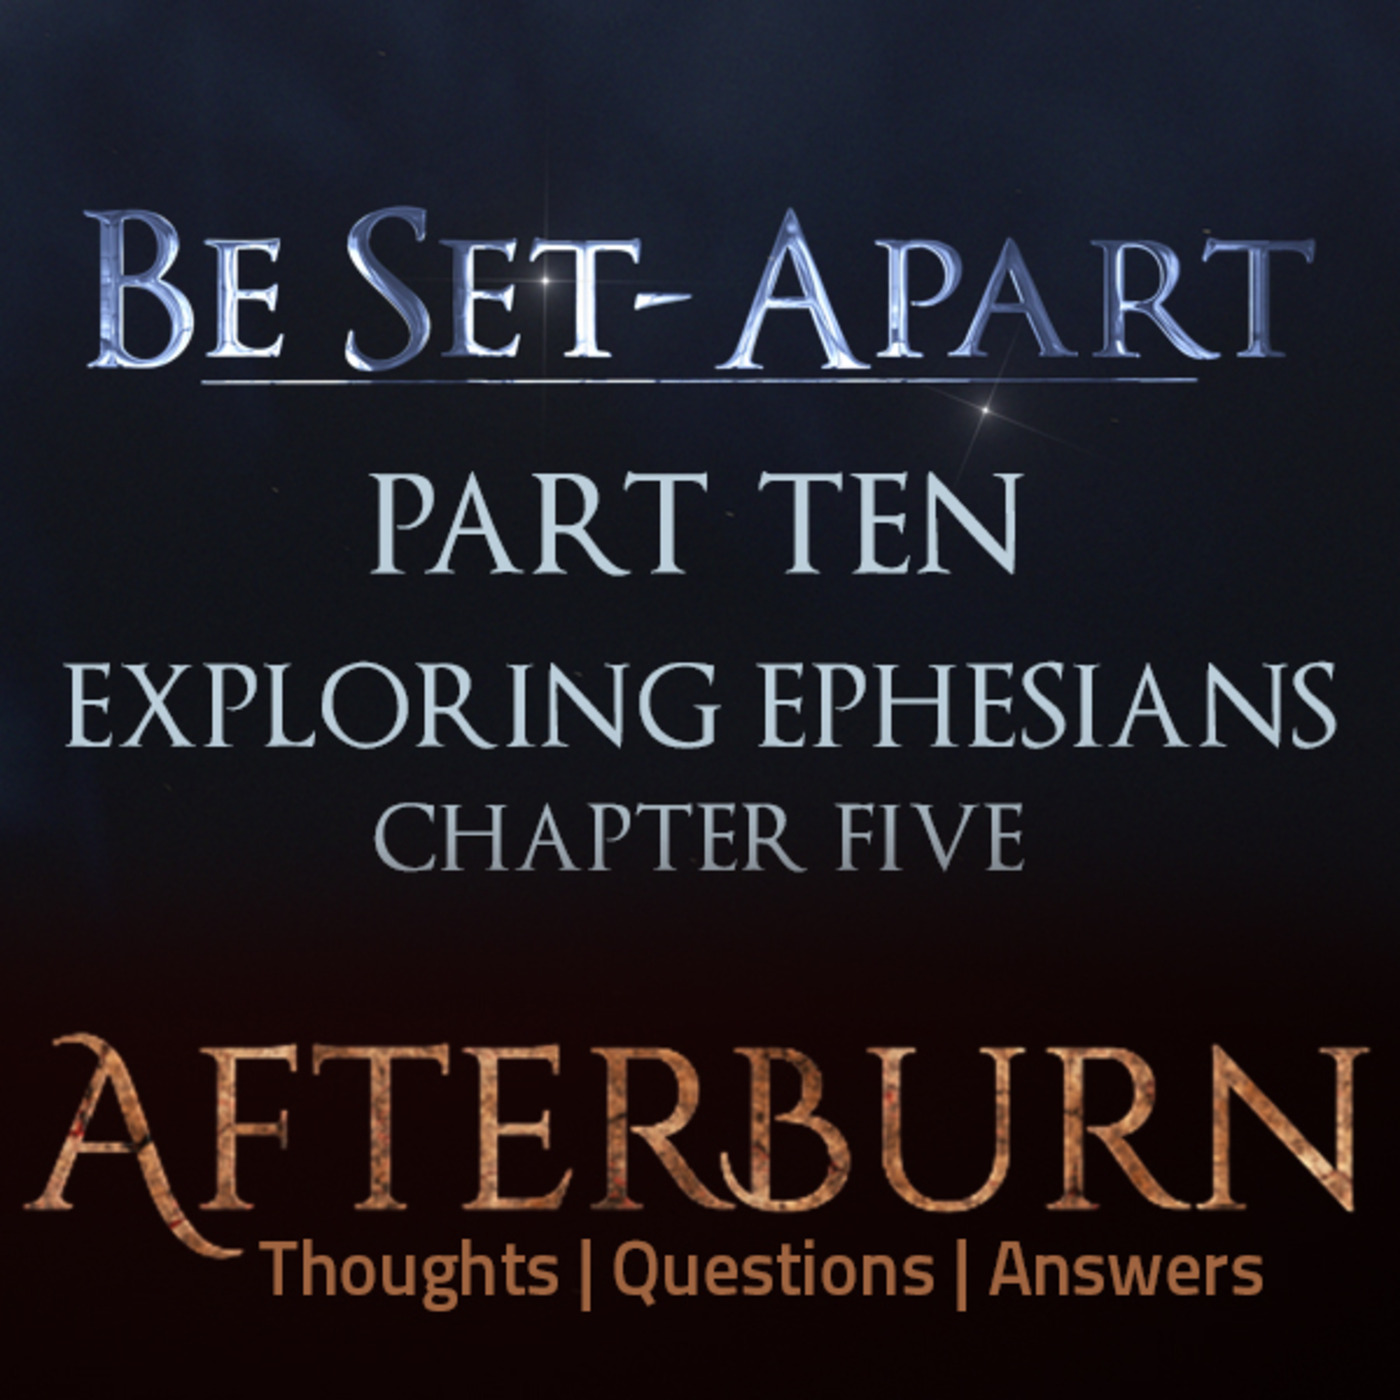 Episode 778: Afterburn | Thoughts, Q&A on Be Set-Apart | Part Ten | Exploring Ephesians Chapter Five